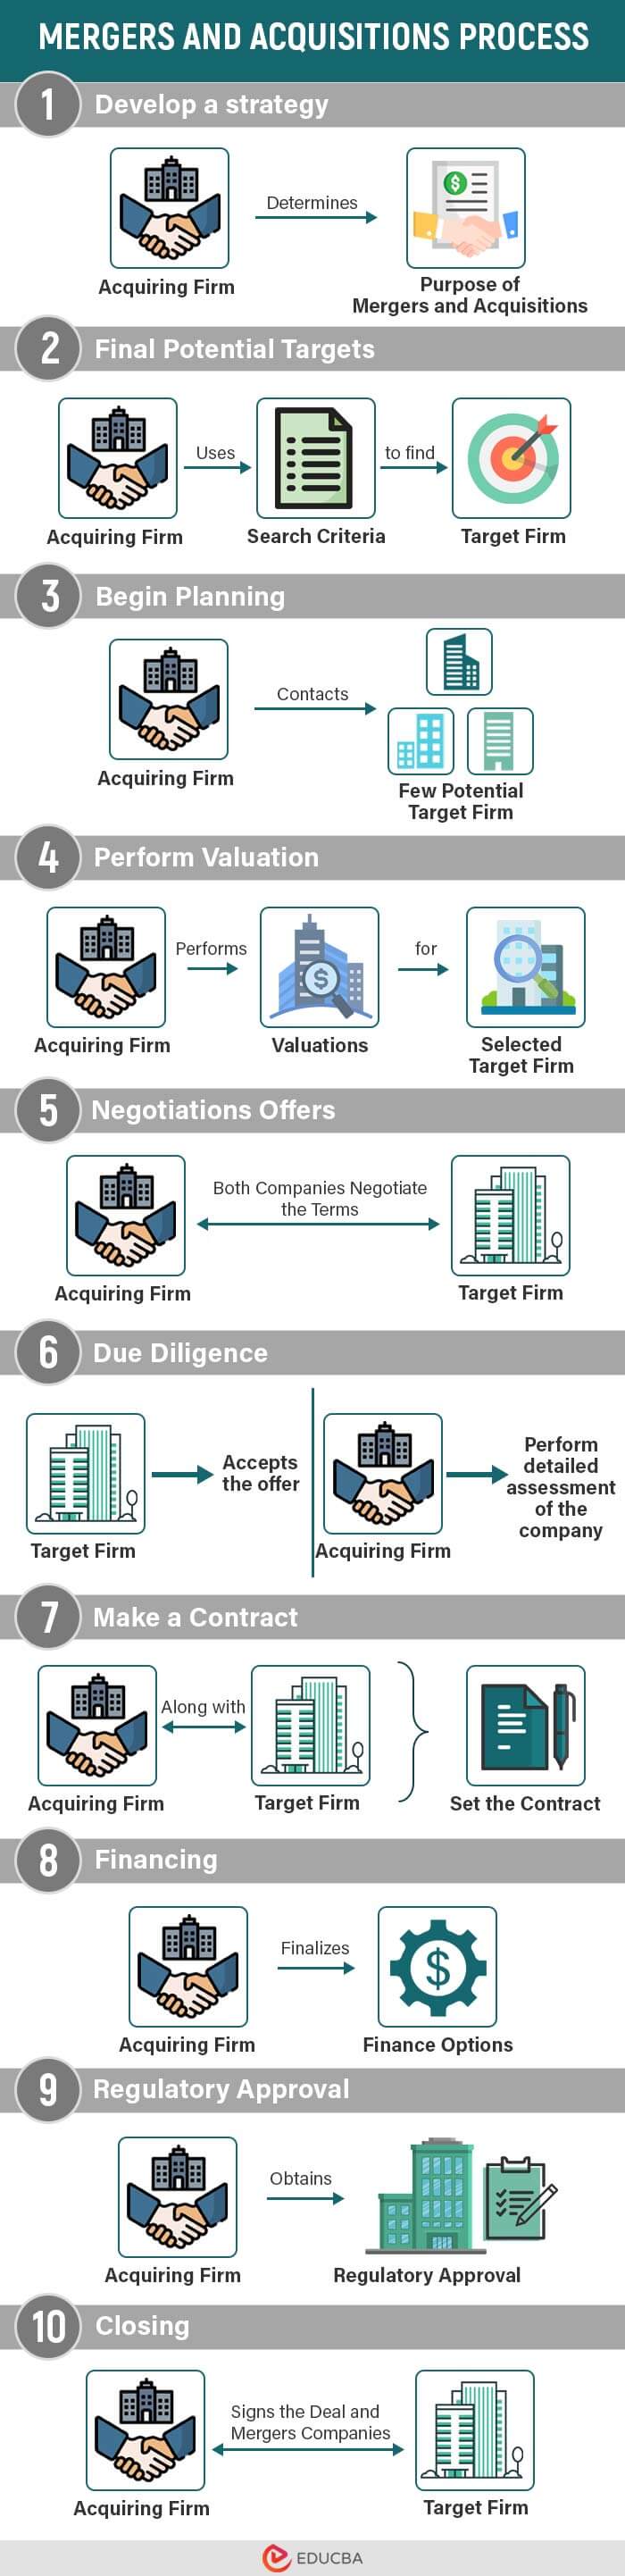 Mergers-and-Acquisitions-Process Infographic